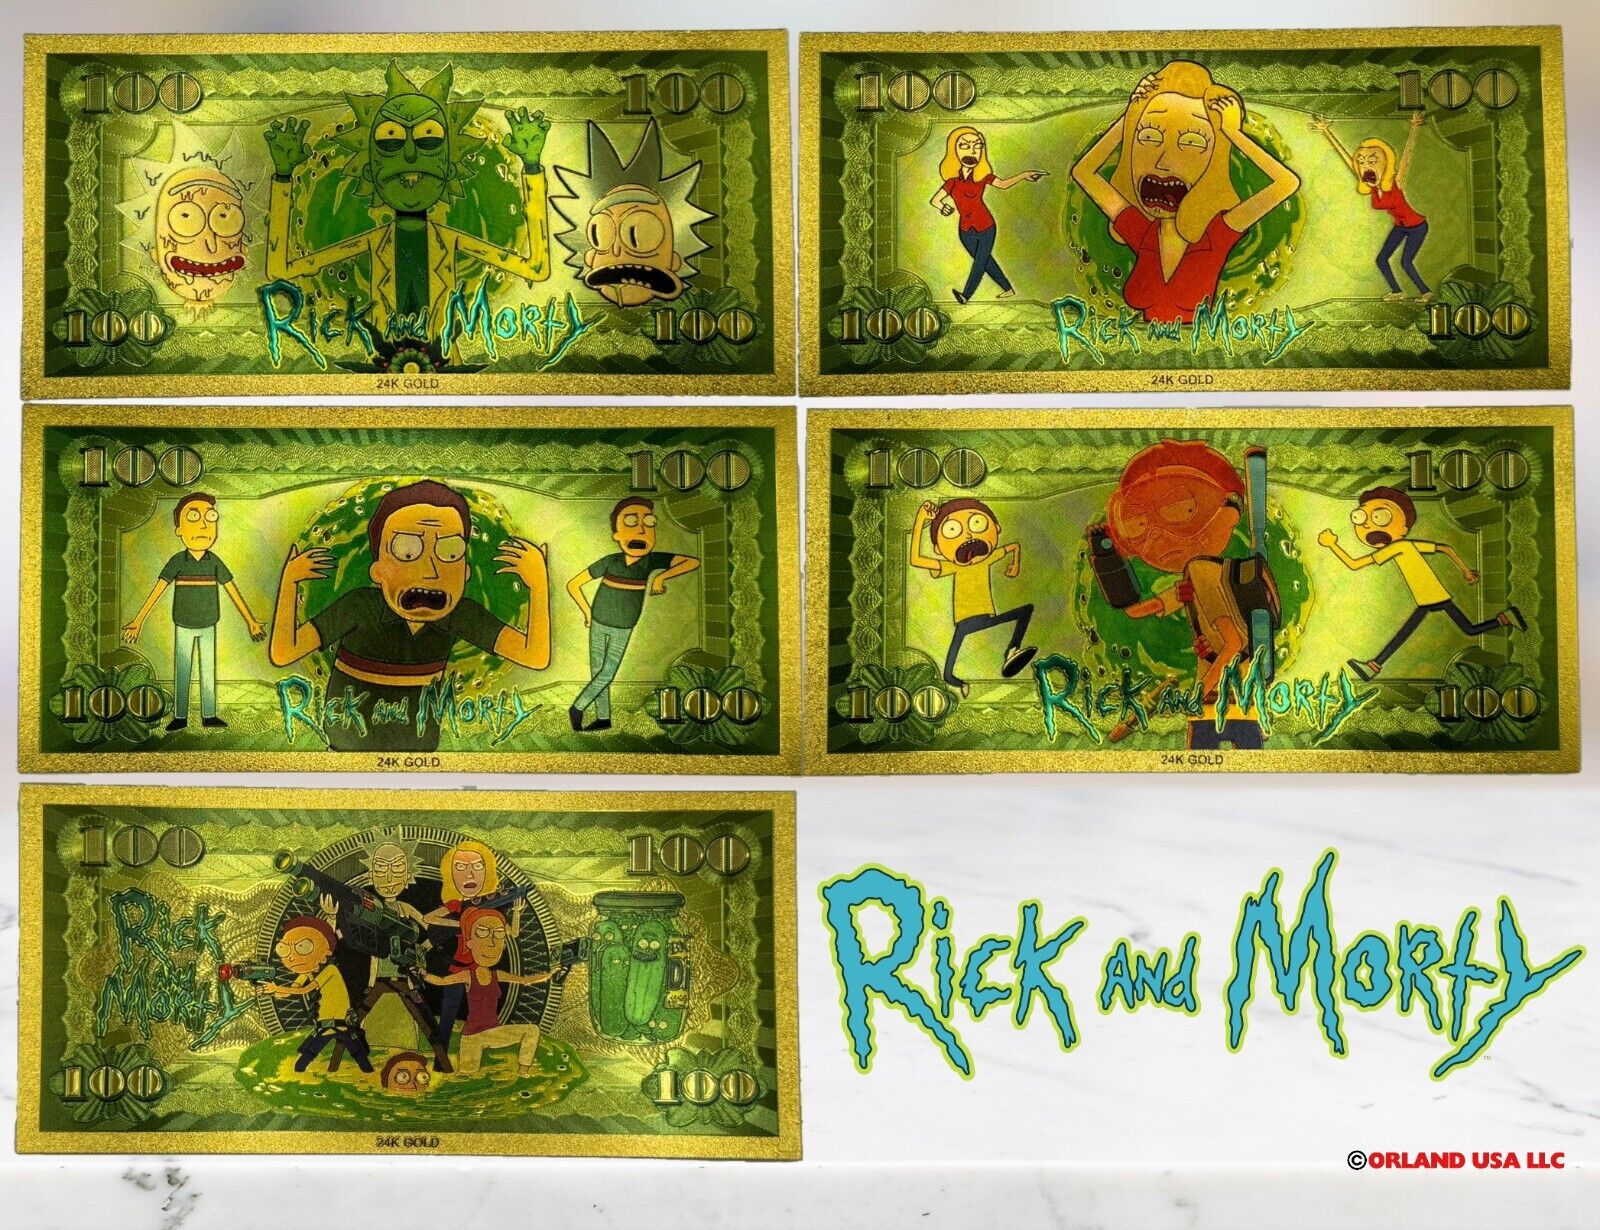 24k Gold Foil Plated Rick And Morty Banknote Warner Bros Cartoon Collectible